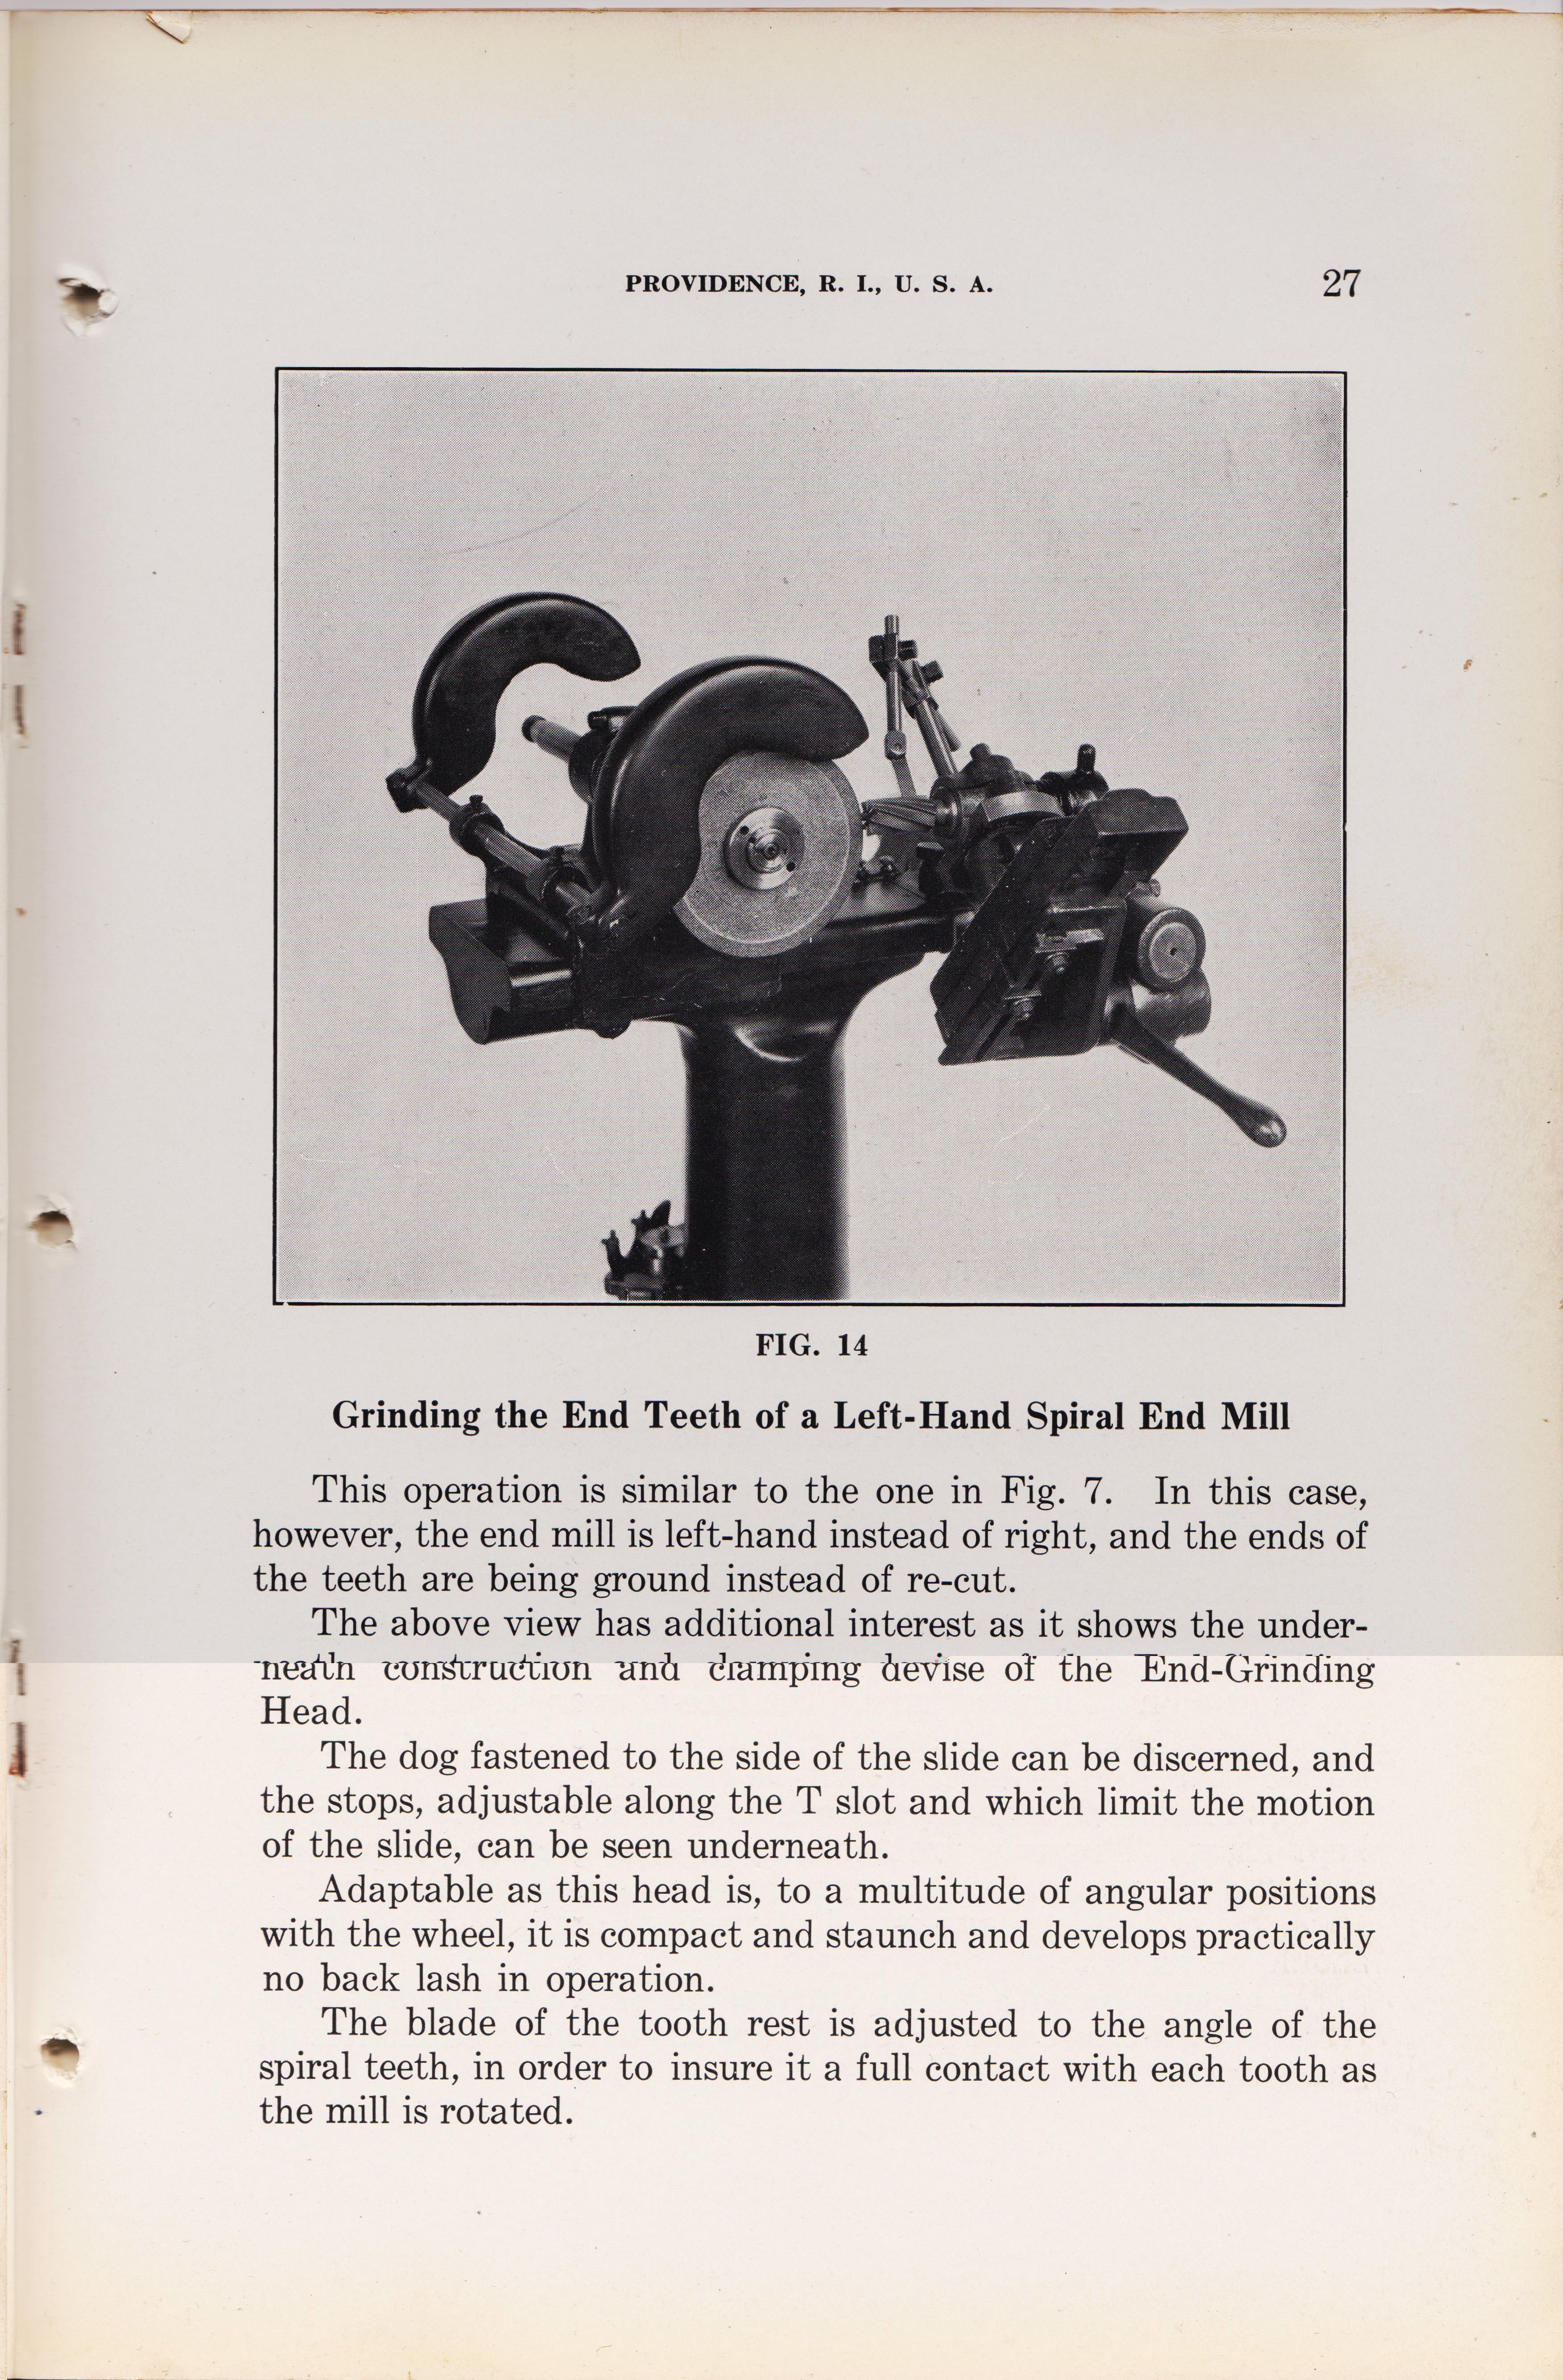 https://antiquemachinery.com/images-2021/Universal-Cutter-and-Reamer-Grinder-Machine-Brown-and-Sharpe-Mfg-Co-1929-No2-No3-pg-27-Grinding-a--Sprial-L-H-end-Mill-End.jpeg